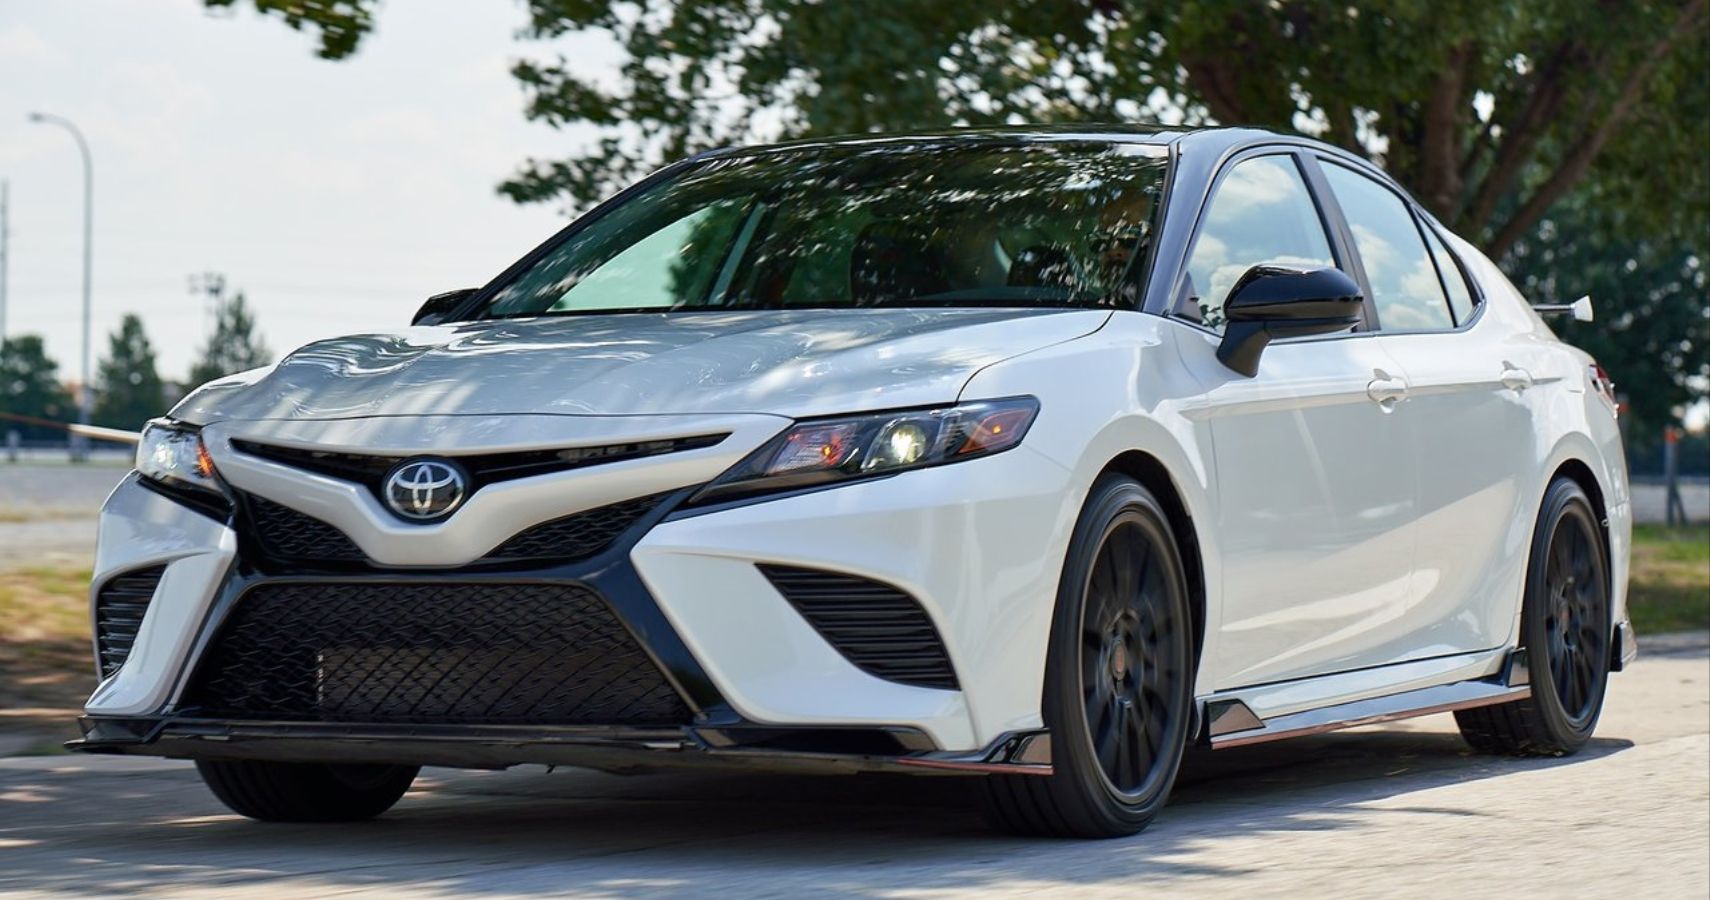 Front view of a 2020 Toyota Camry TRD 